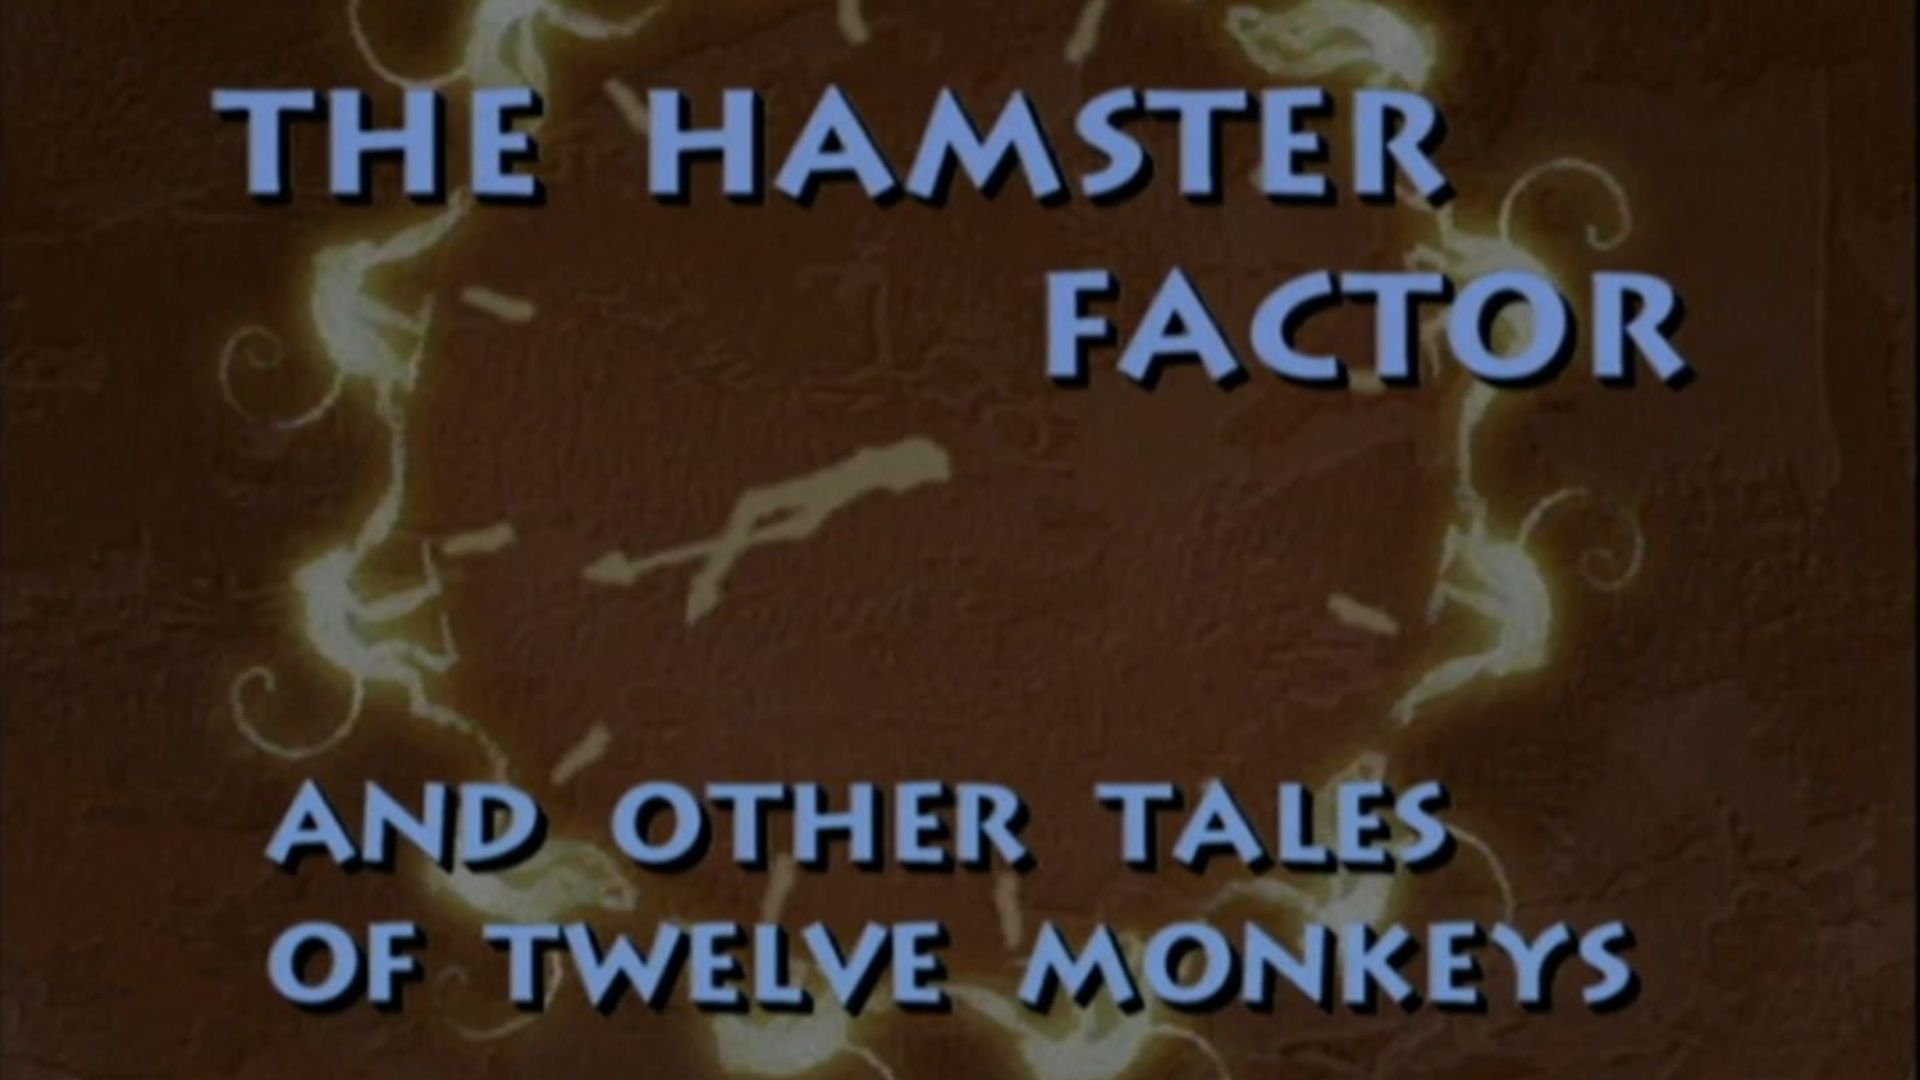 The Hamster Factor and Other Tales of Twelve Monkeys background